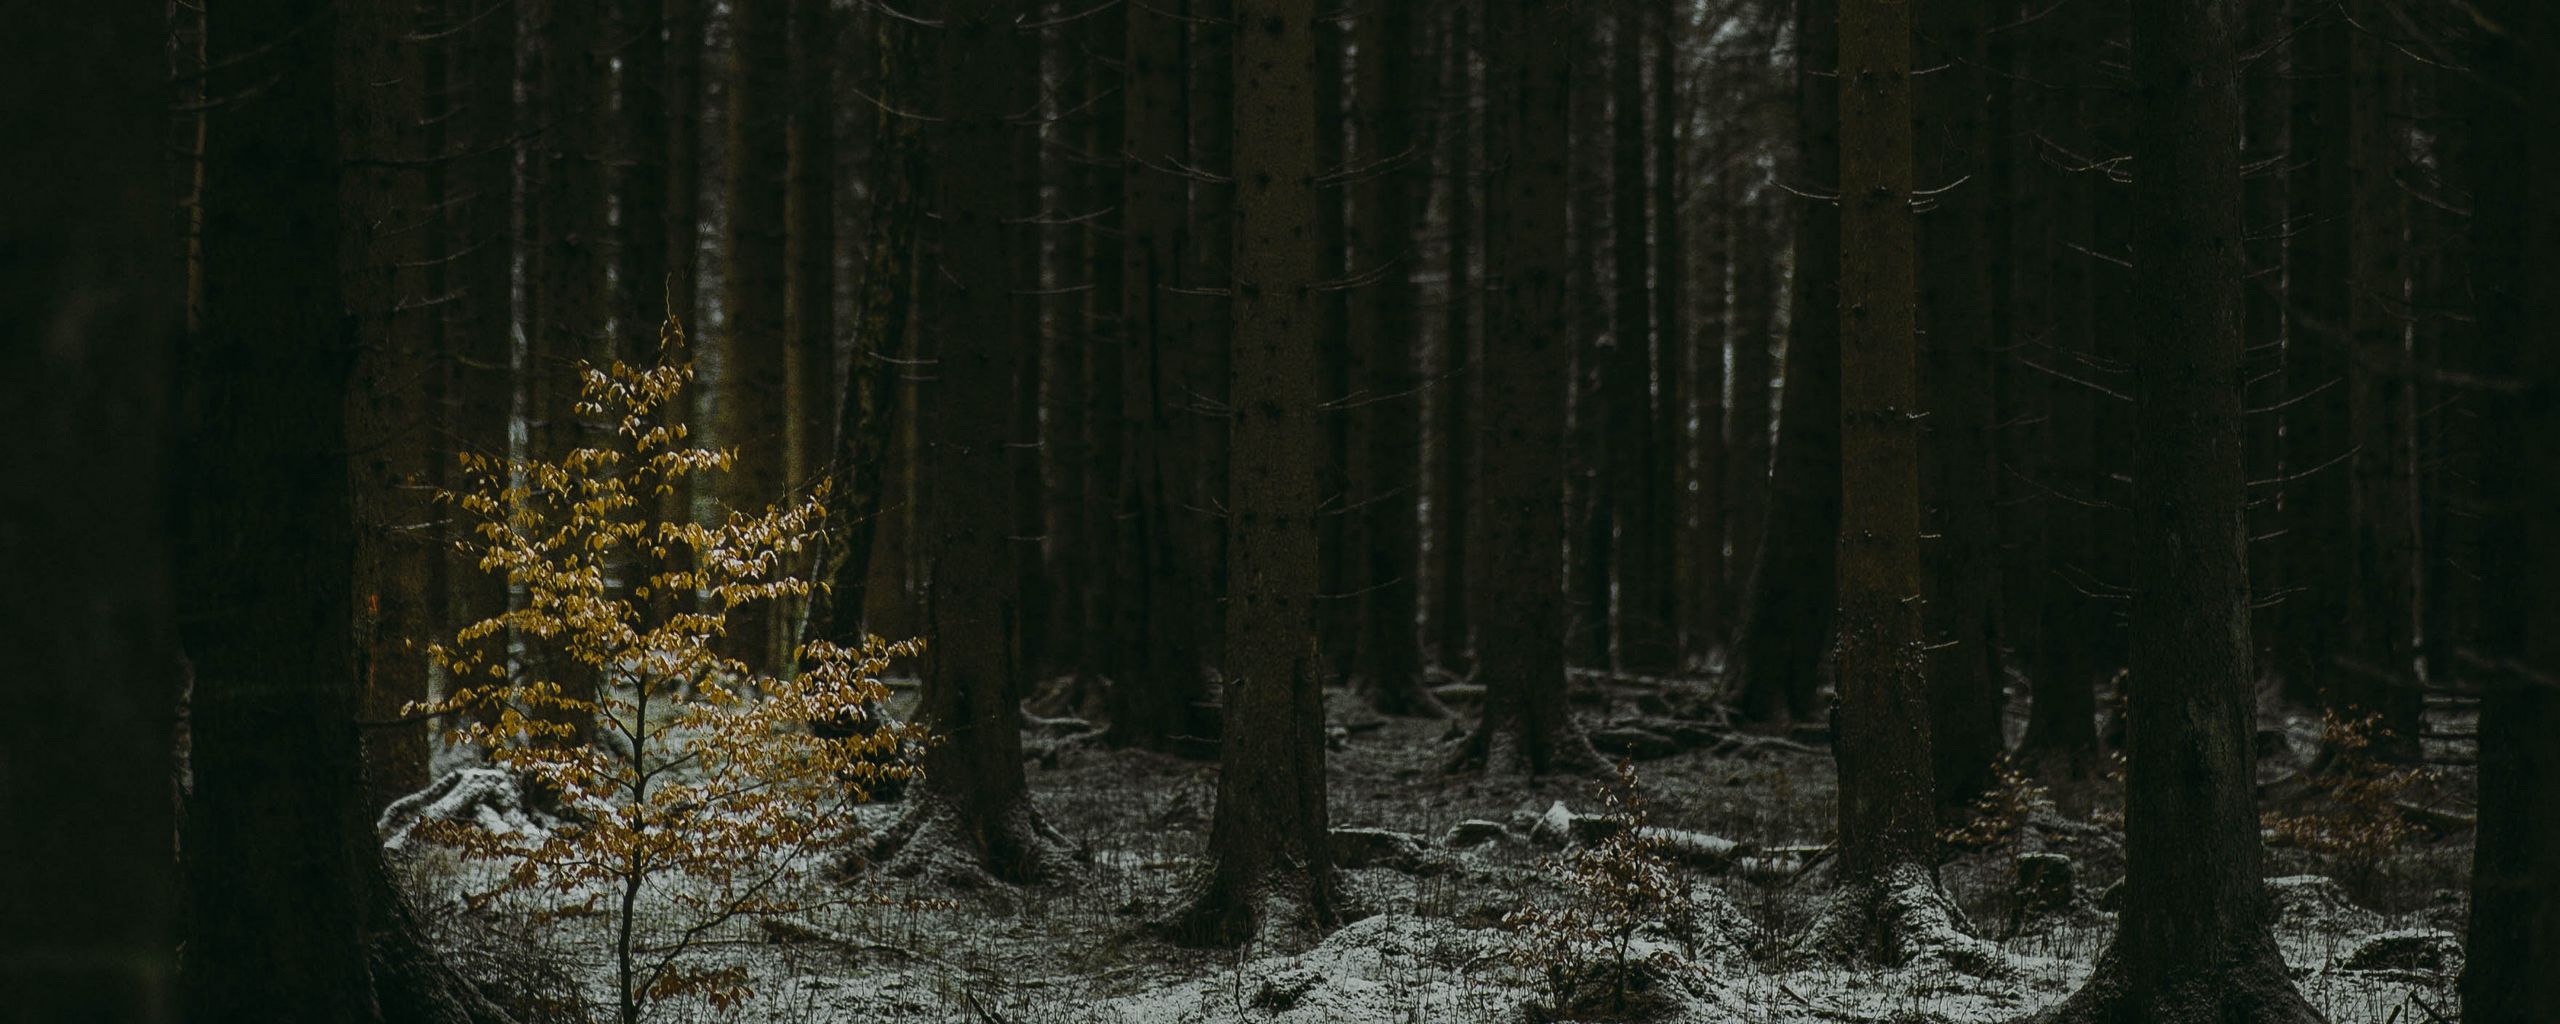 Download wallpaper 2560x1024 forest, dark, conifer, trees, winter ultrawide monitor HD background